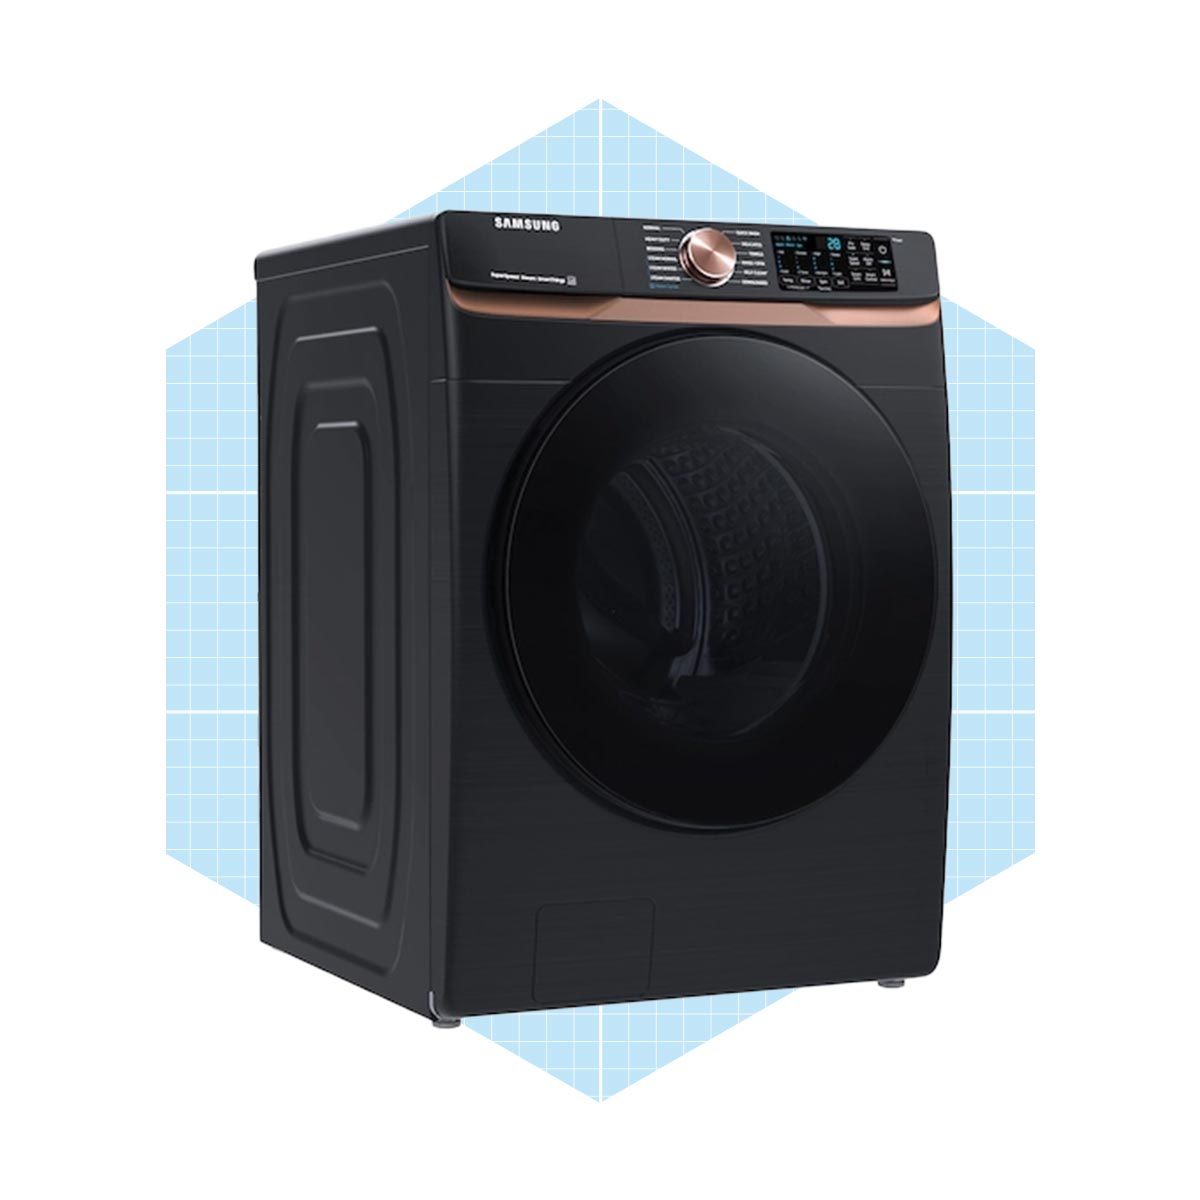 Samsung 5.0 cu. ft. Extra Large Capacity Smart Front Load Washer